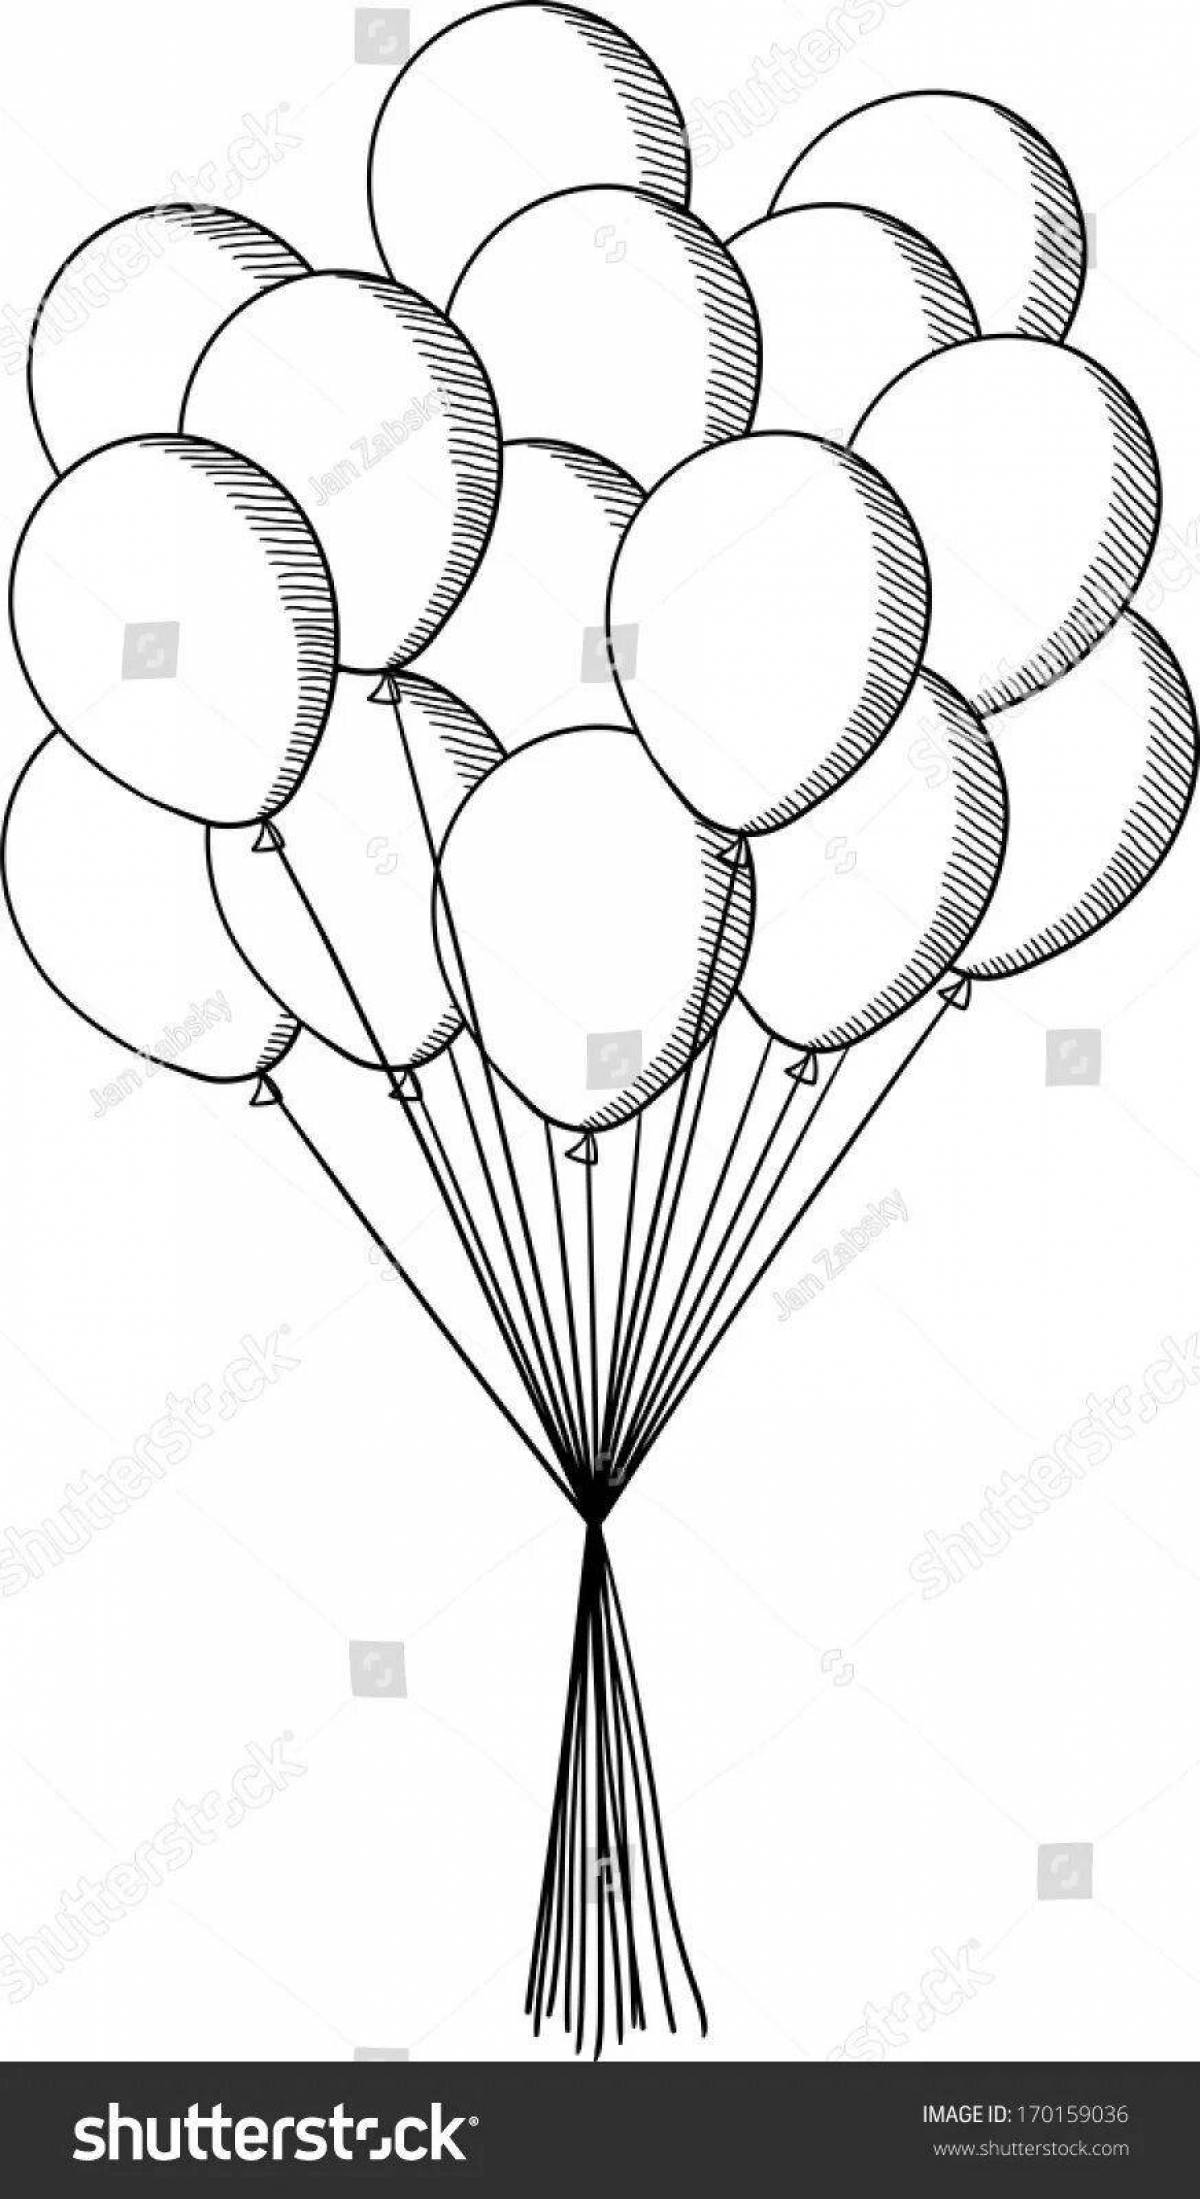 Coloring book funny bunch of balloons